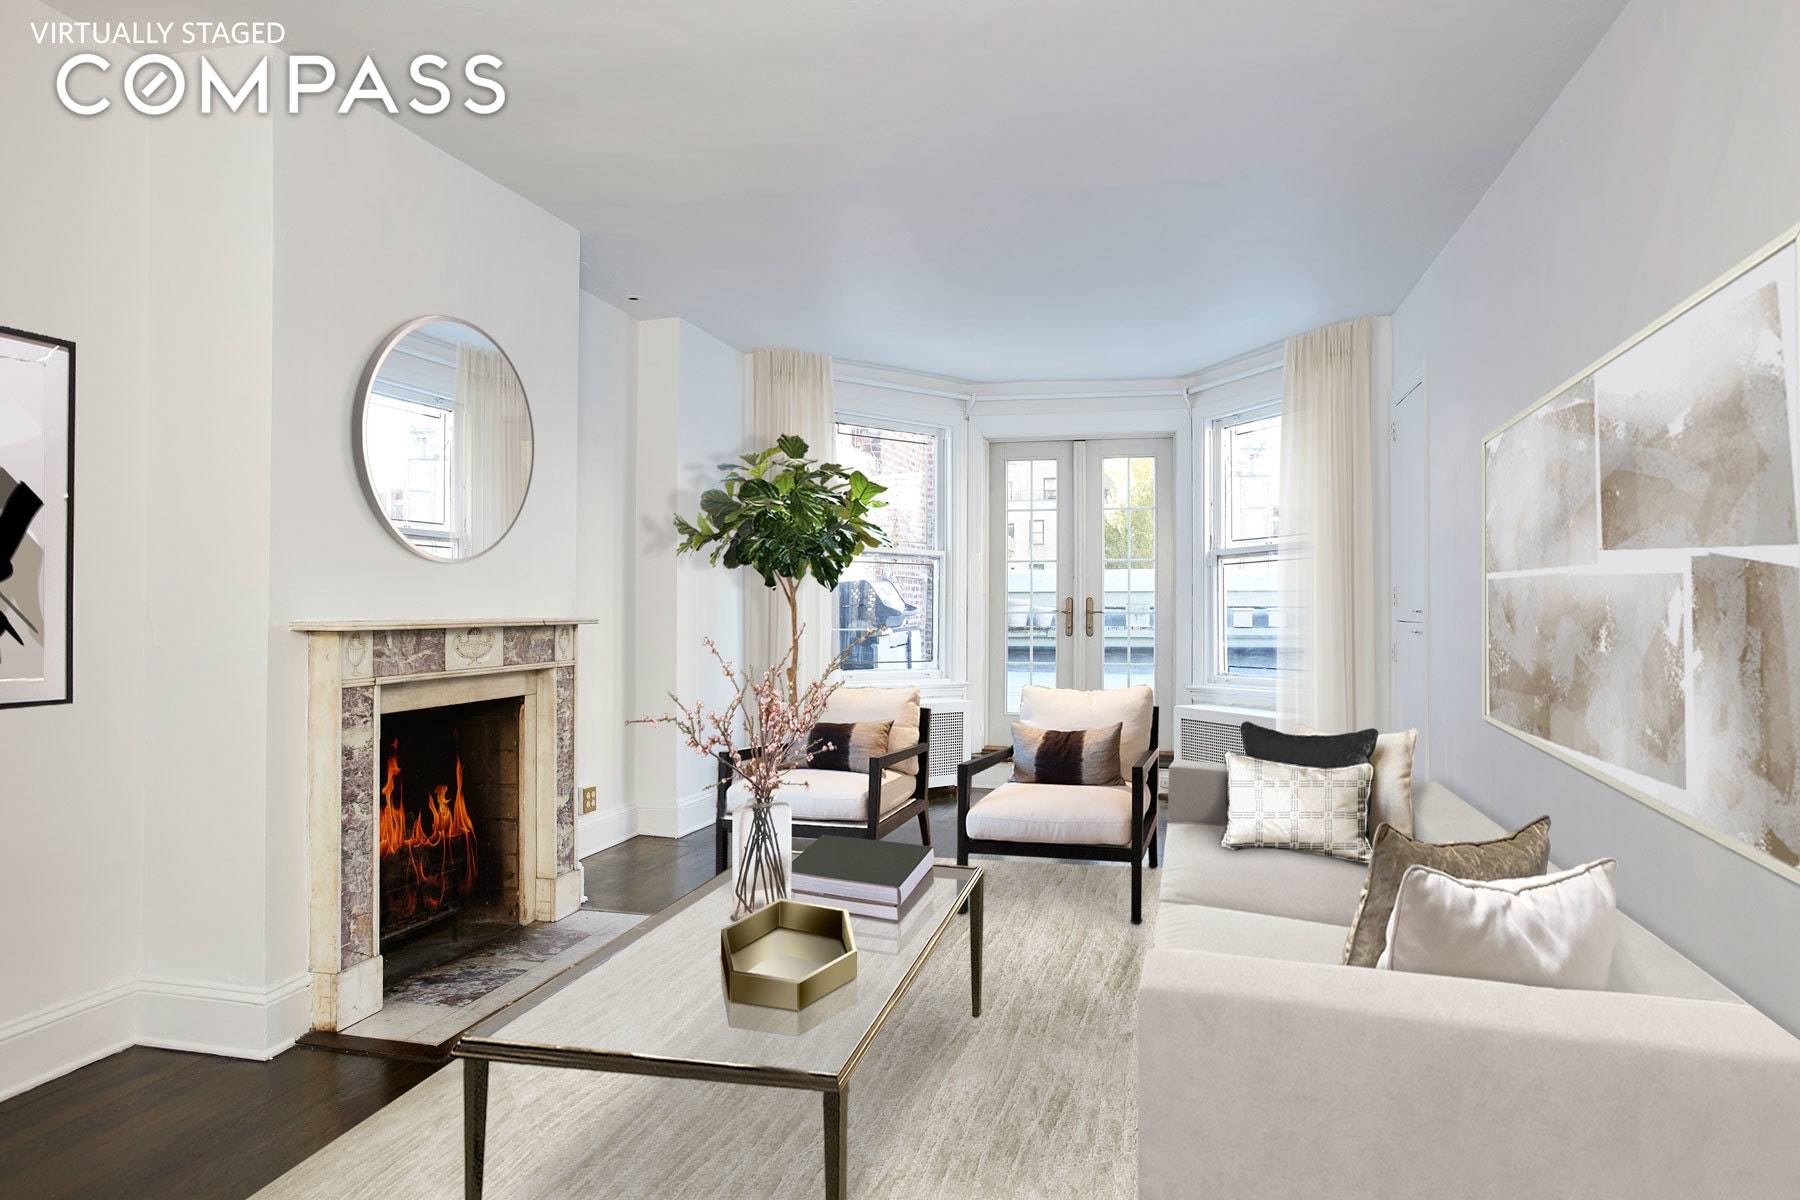 Located in the heart of the Upper East Gold Coast this unique 3 bedroom, 2 bath prewar duplex sits atop a privately owned townhouse just steps from Central Park.